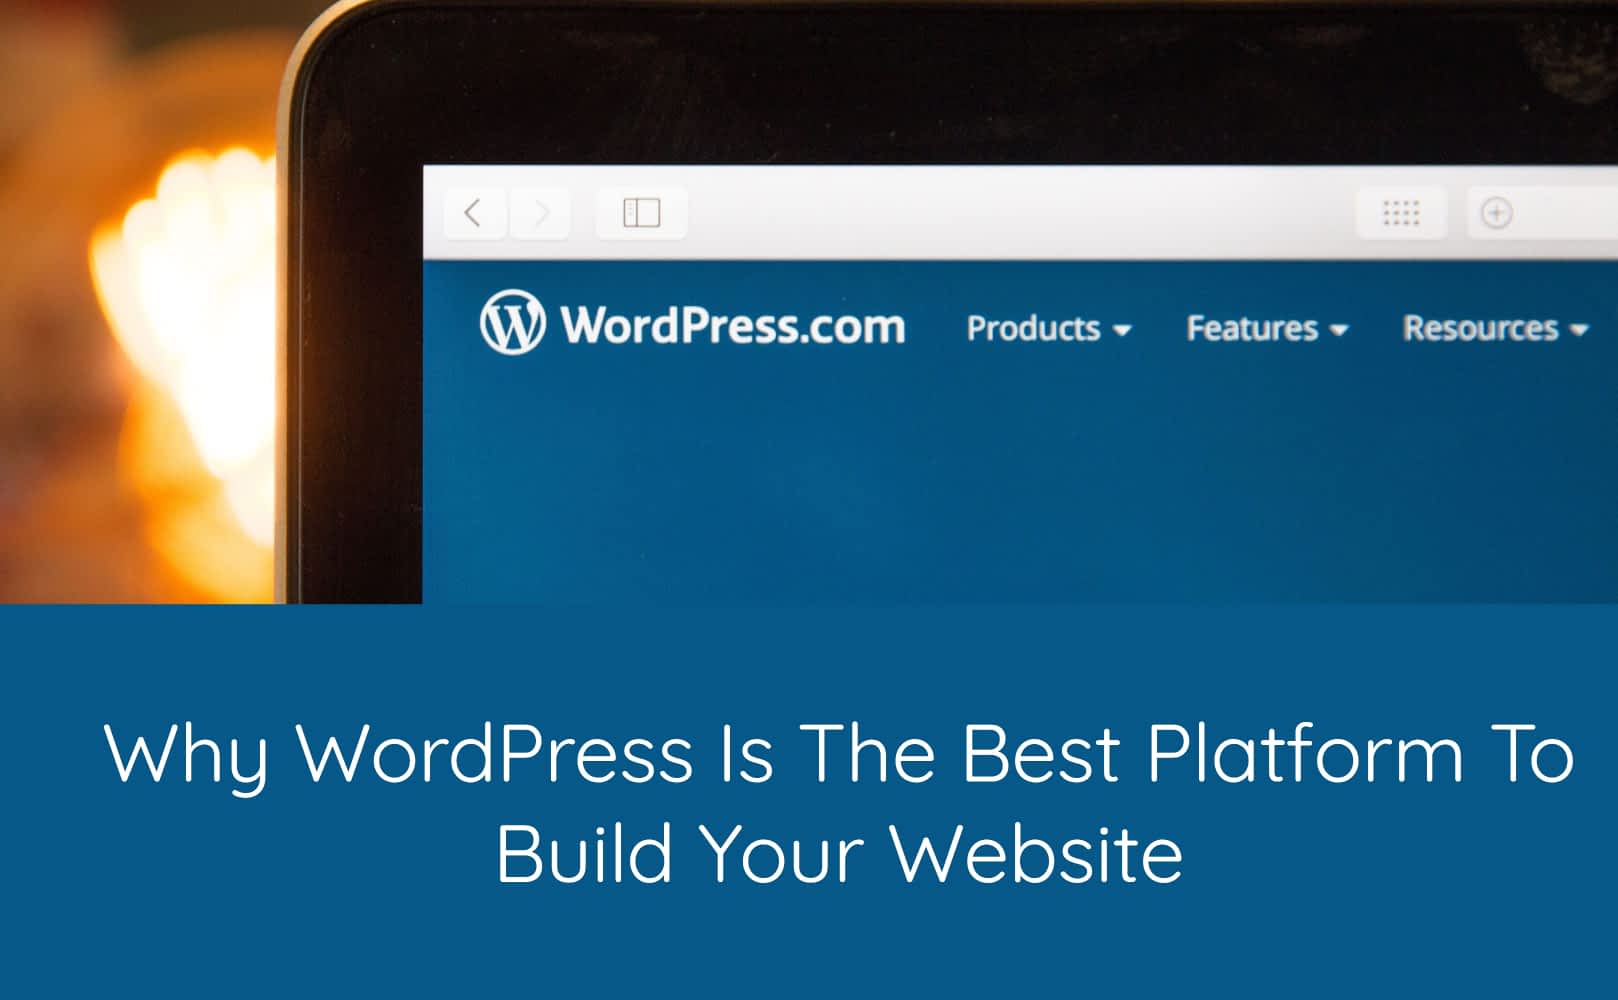 Why WordPress is the Best Platform to Build Your Website